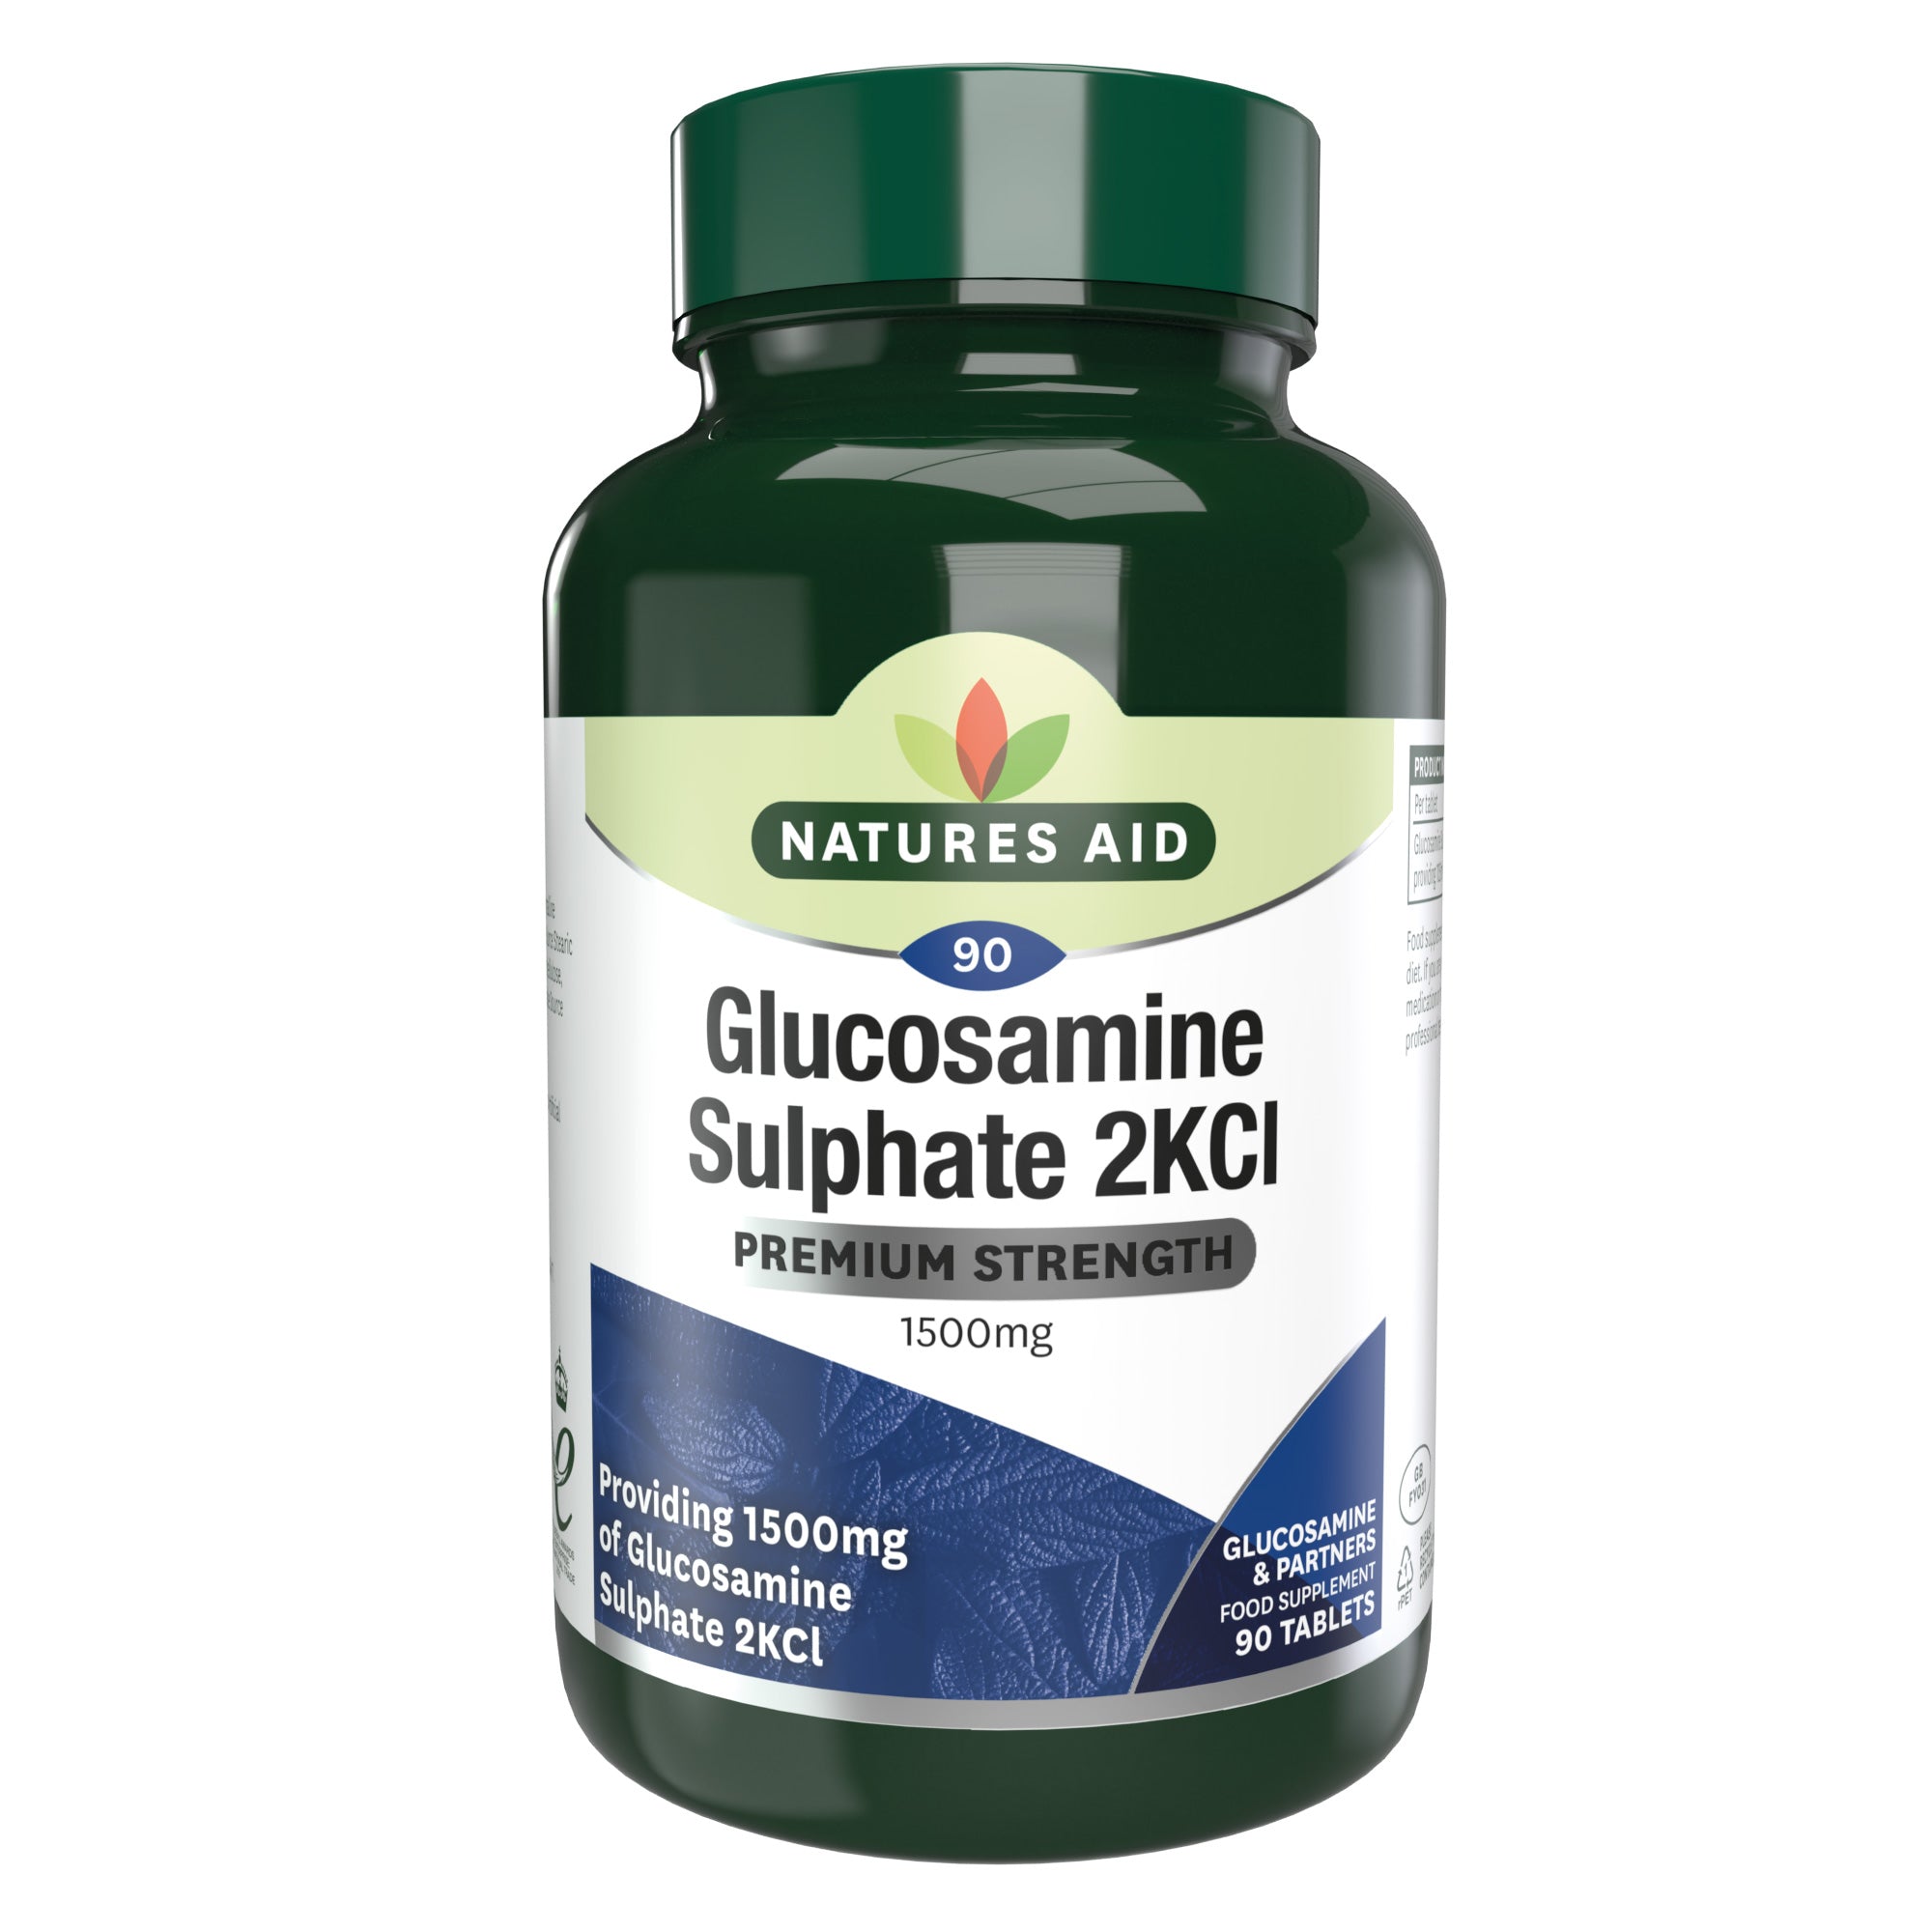 NATURES AID GLUCOSAMINE SULPHATE 1500MG  765056